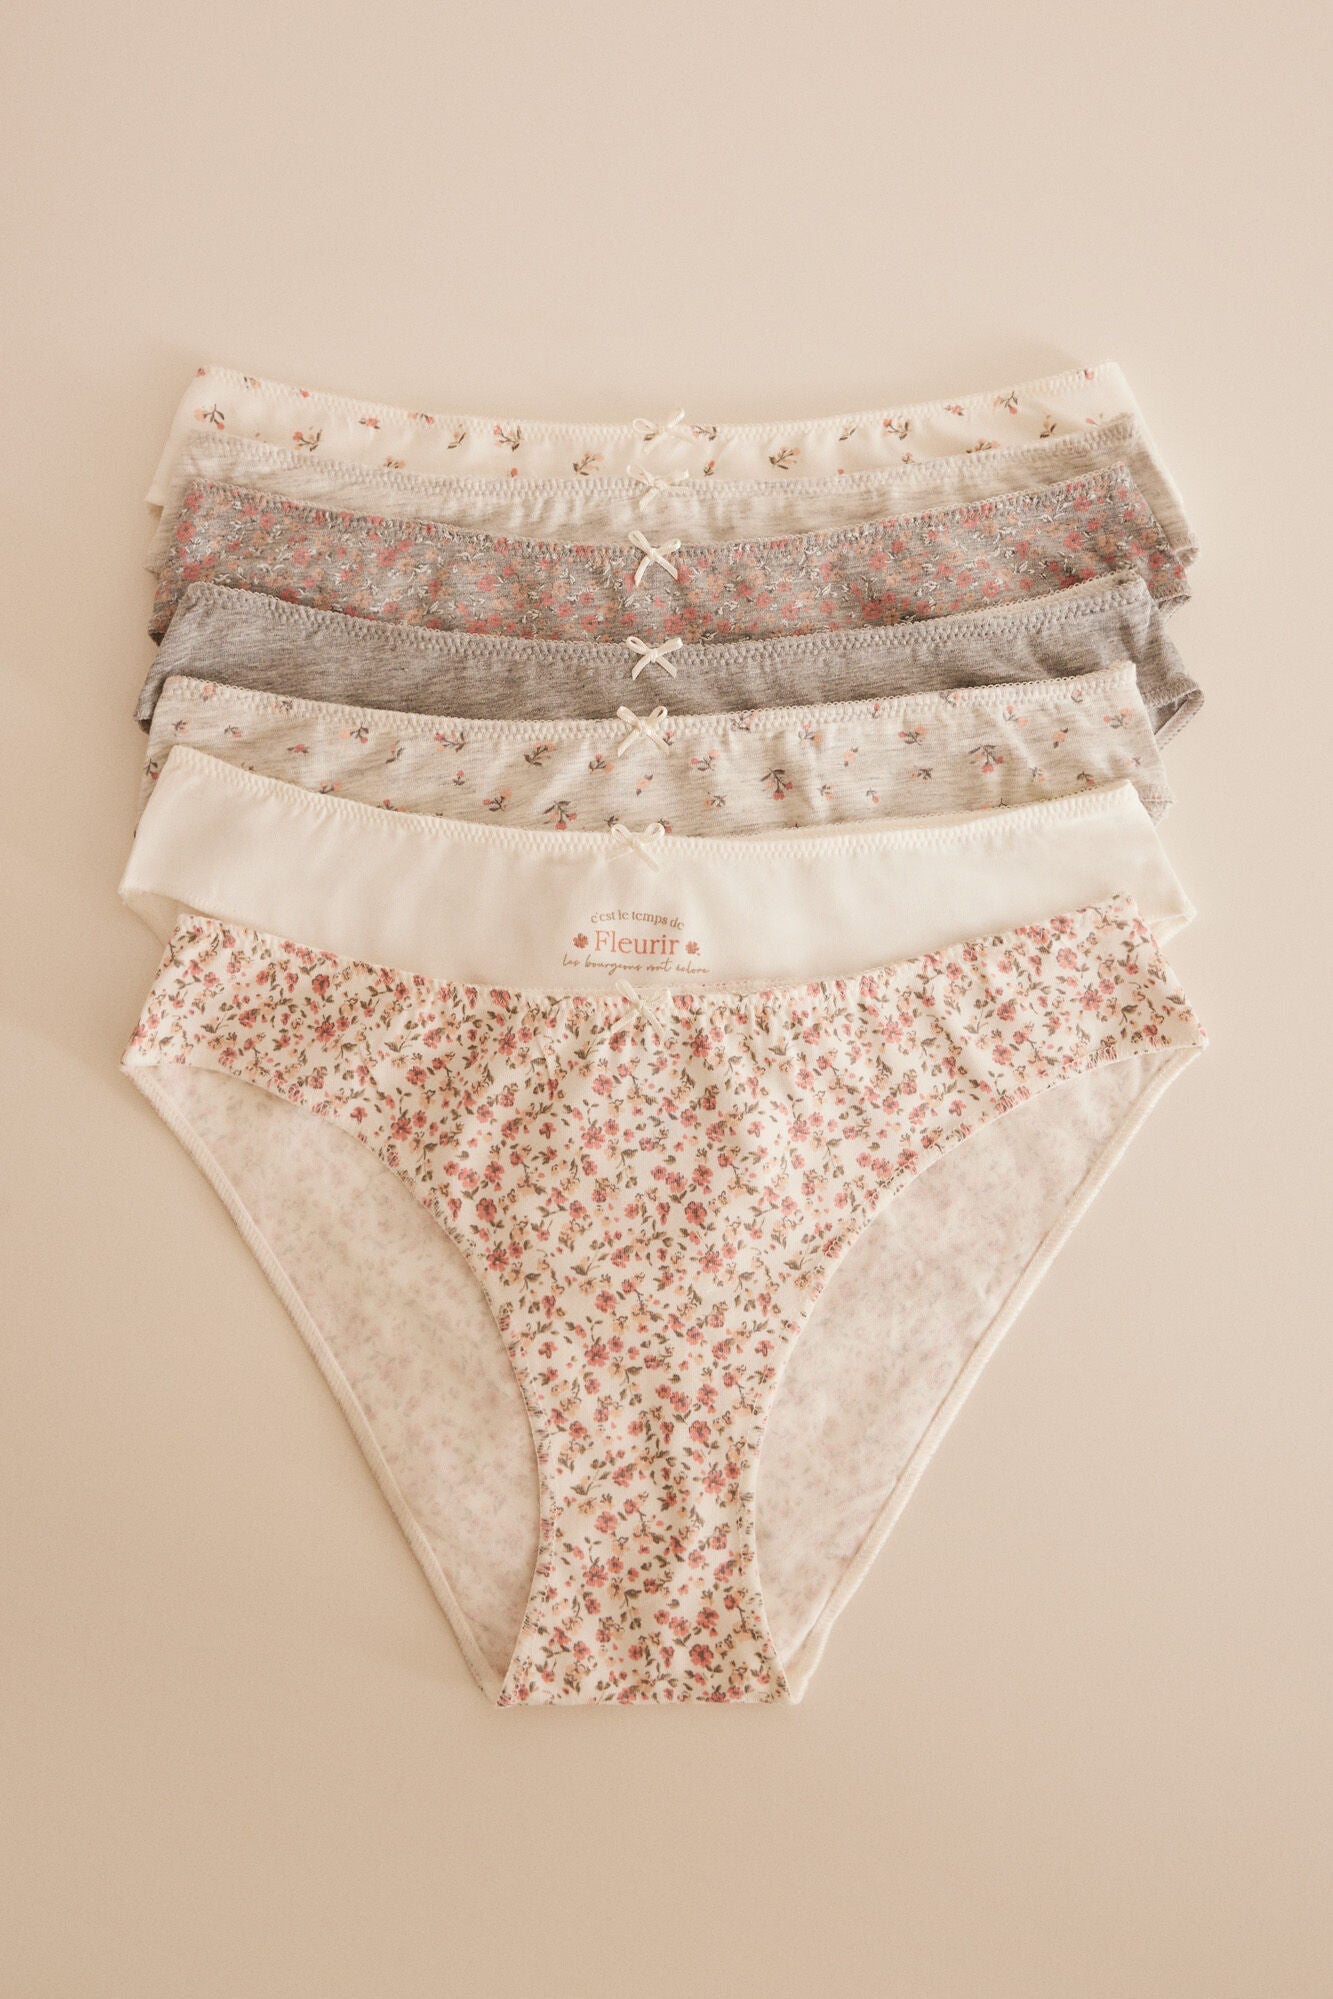 Pack of 7 gray floral cotton panties